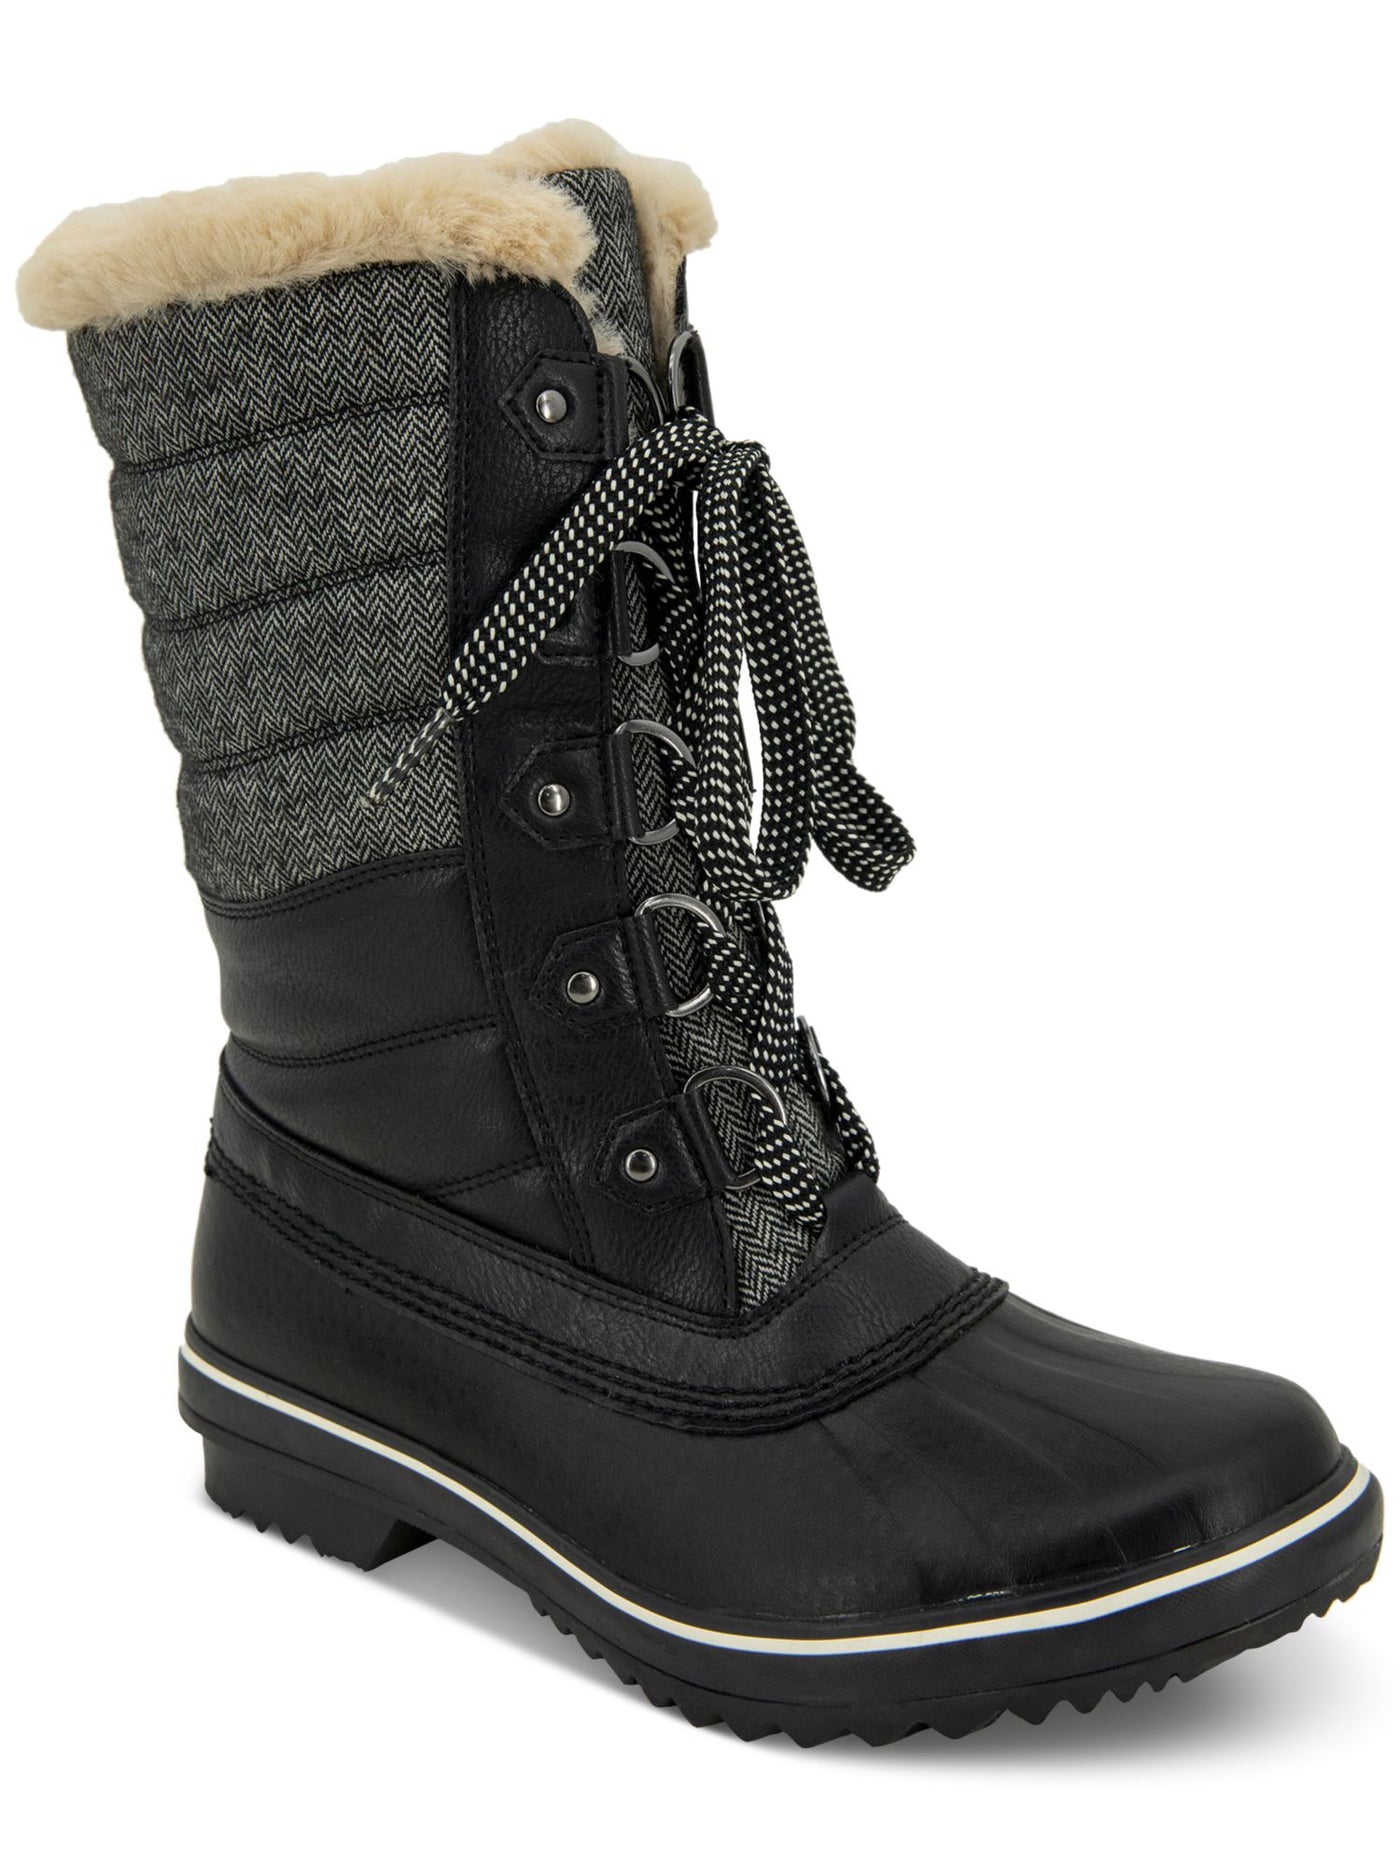 JBU BY JAMBU Womens Black Water Resistant Quilted Siberia Round Toe Lace-Up Winter 9 M